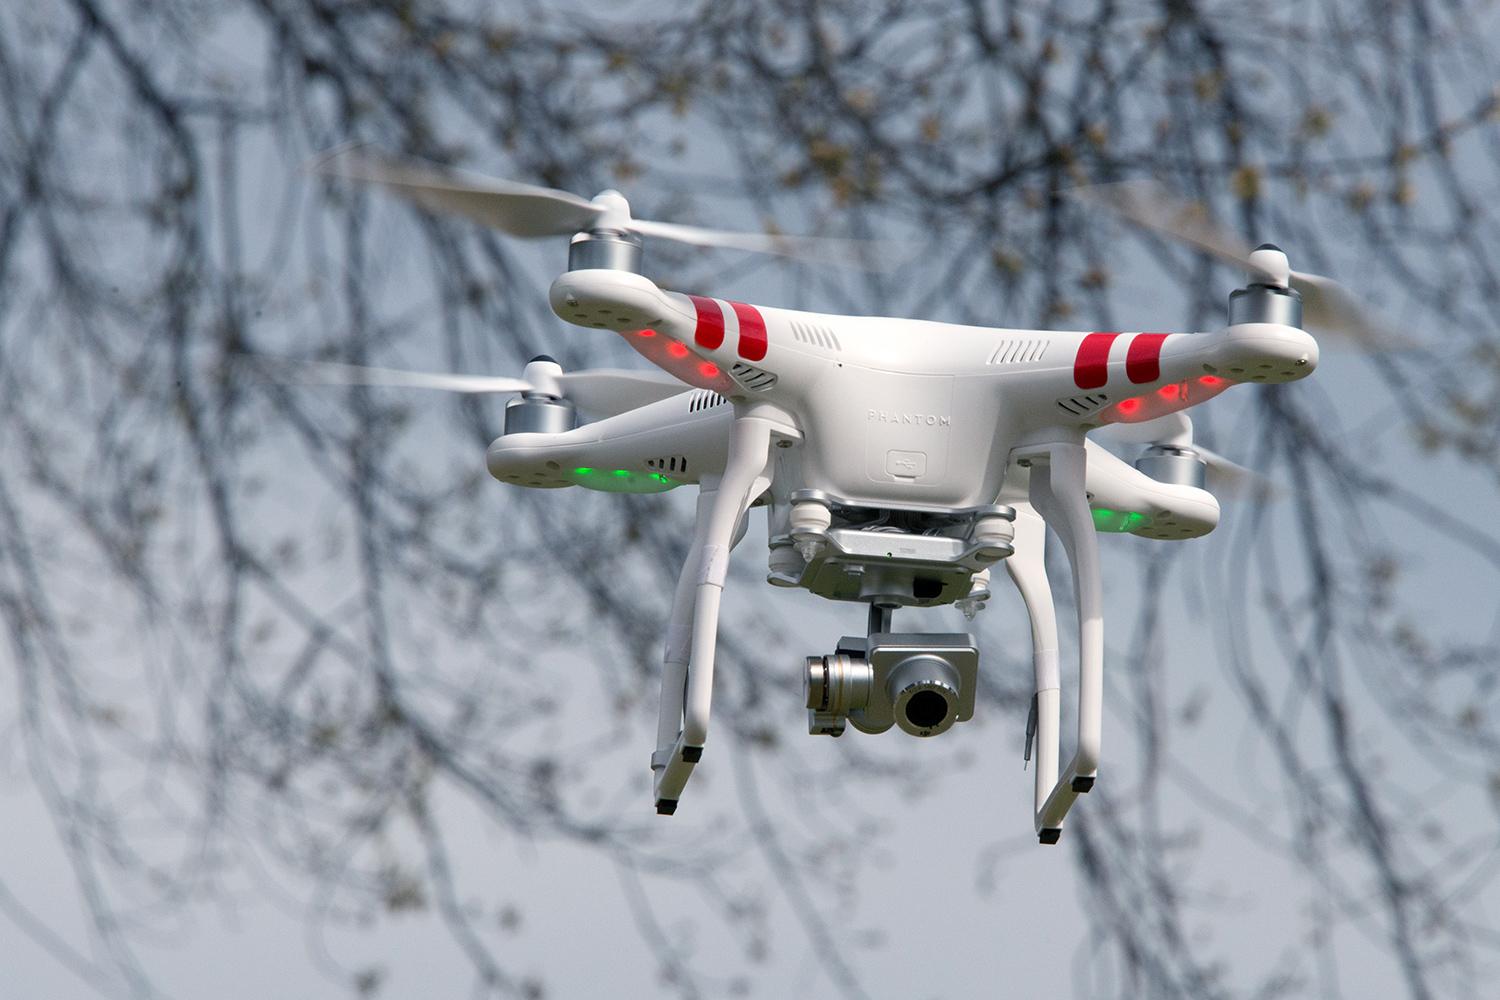 You won’t know you wanted a drone until you play with DJI’s Phantom 2 Vision+